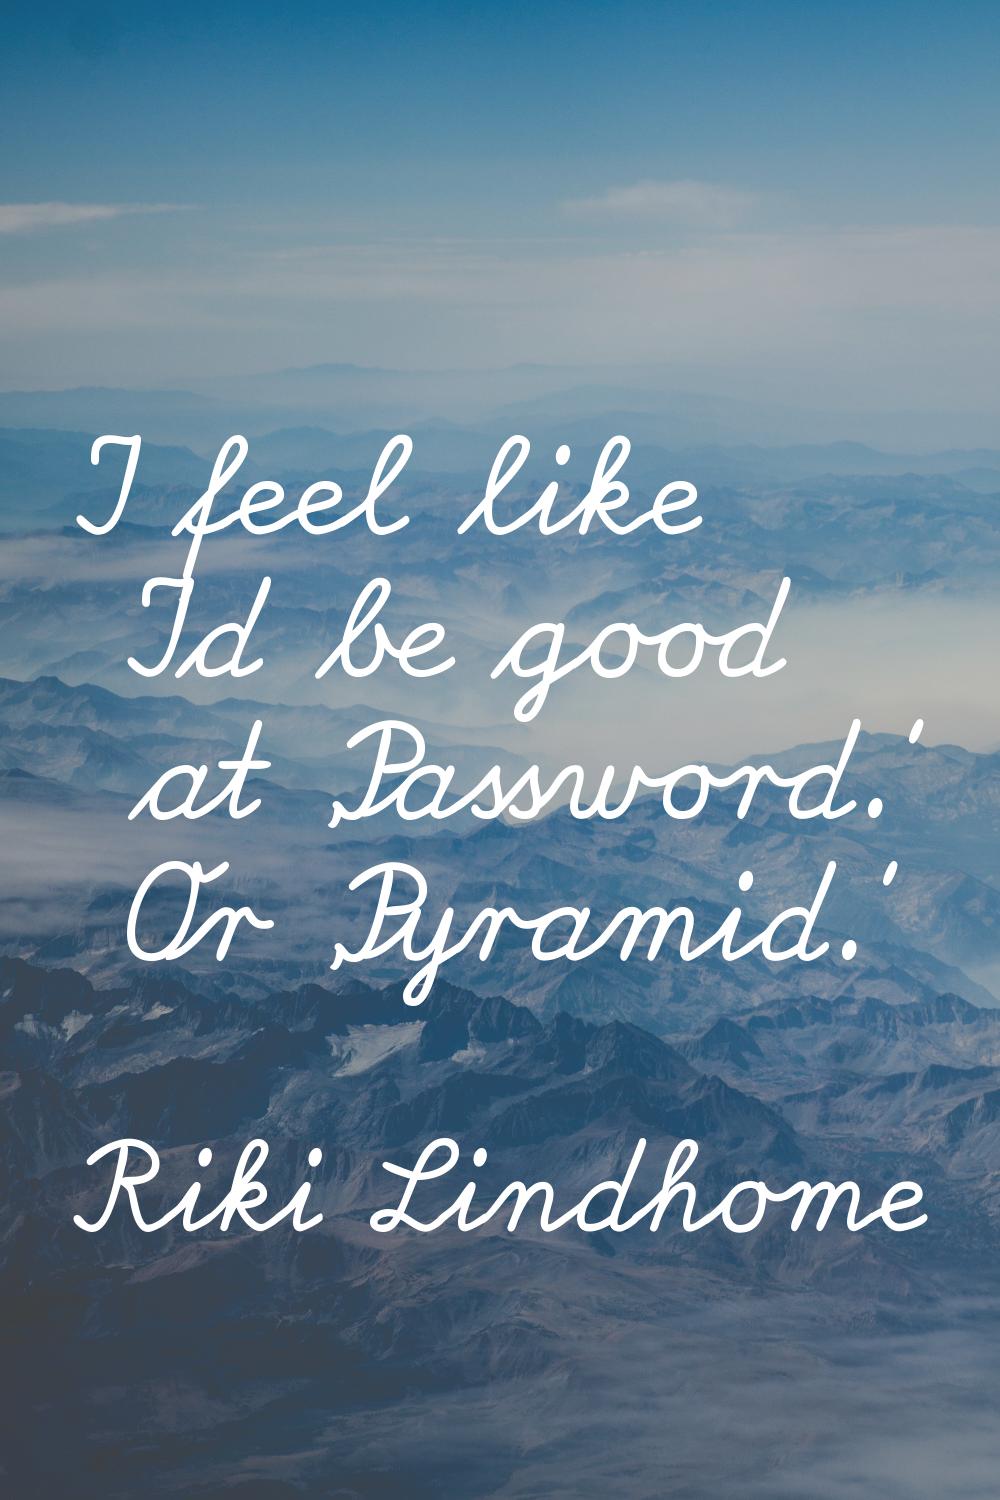 I feel like I'd be good at 'Password.' Or 'Pyramid.'